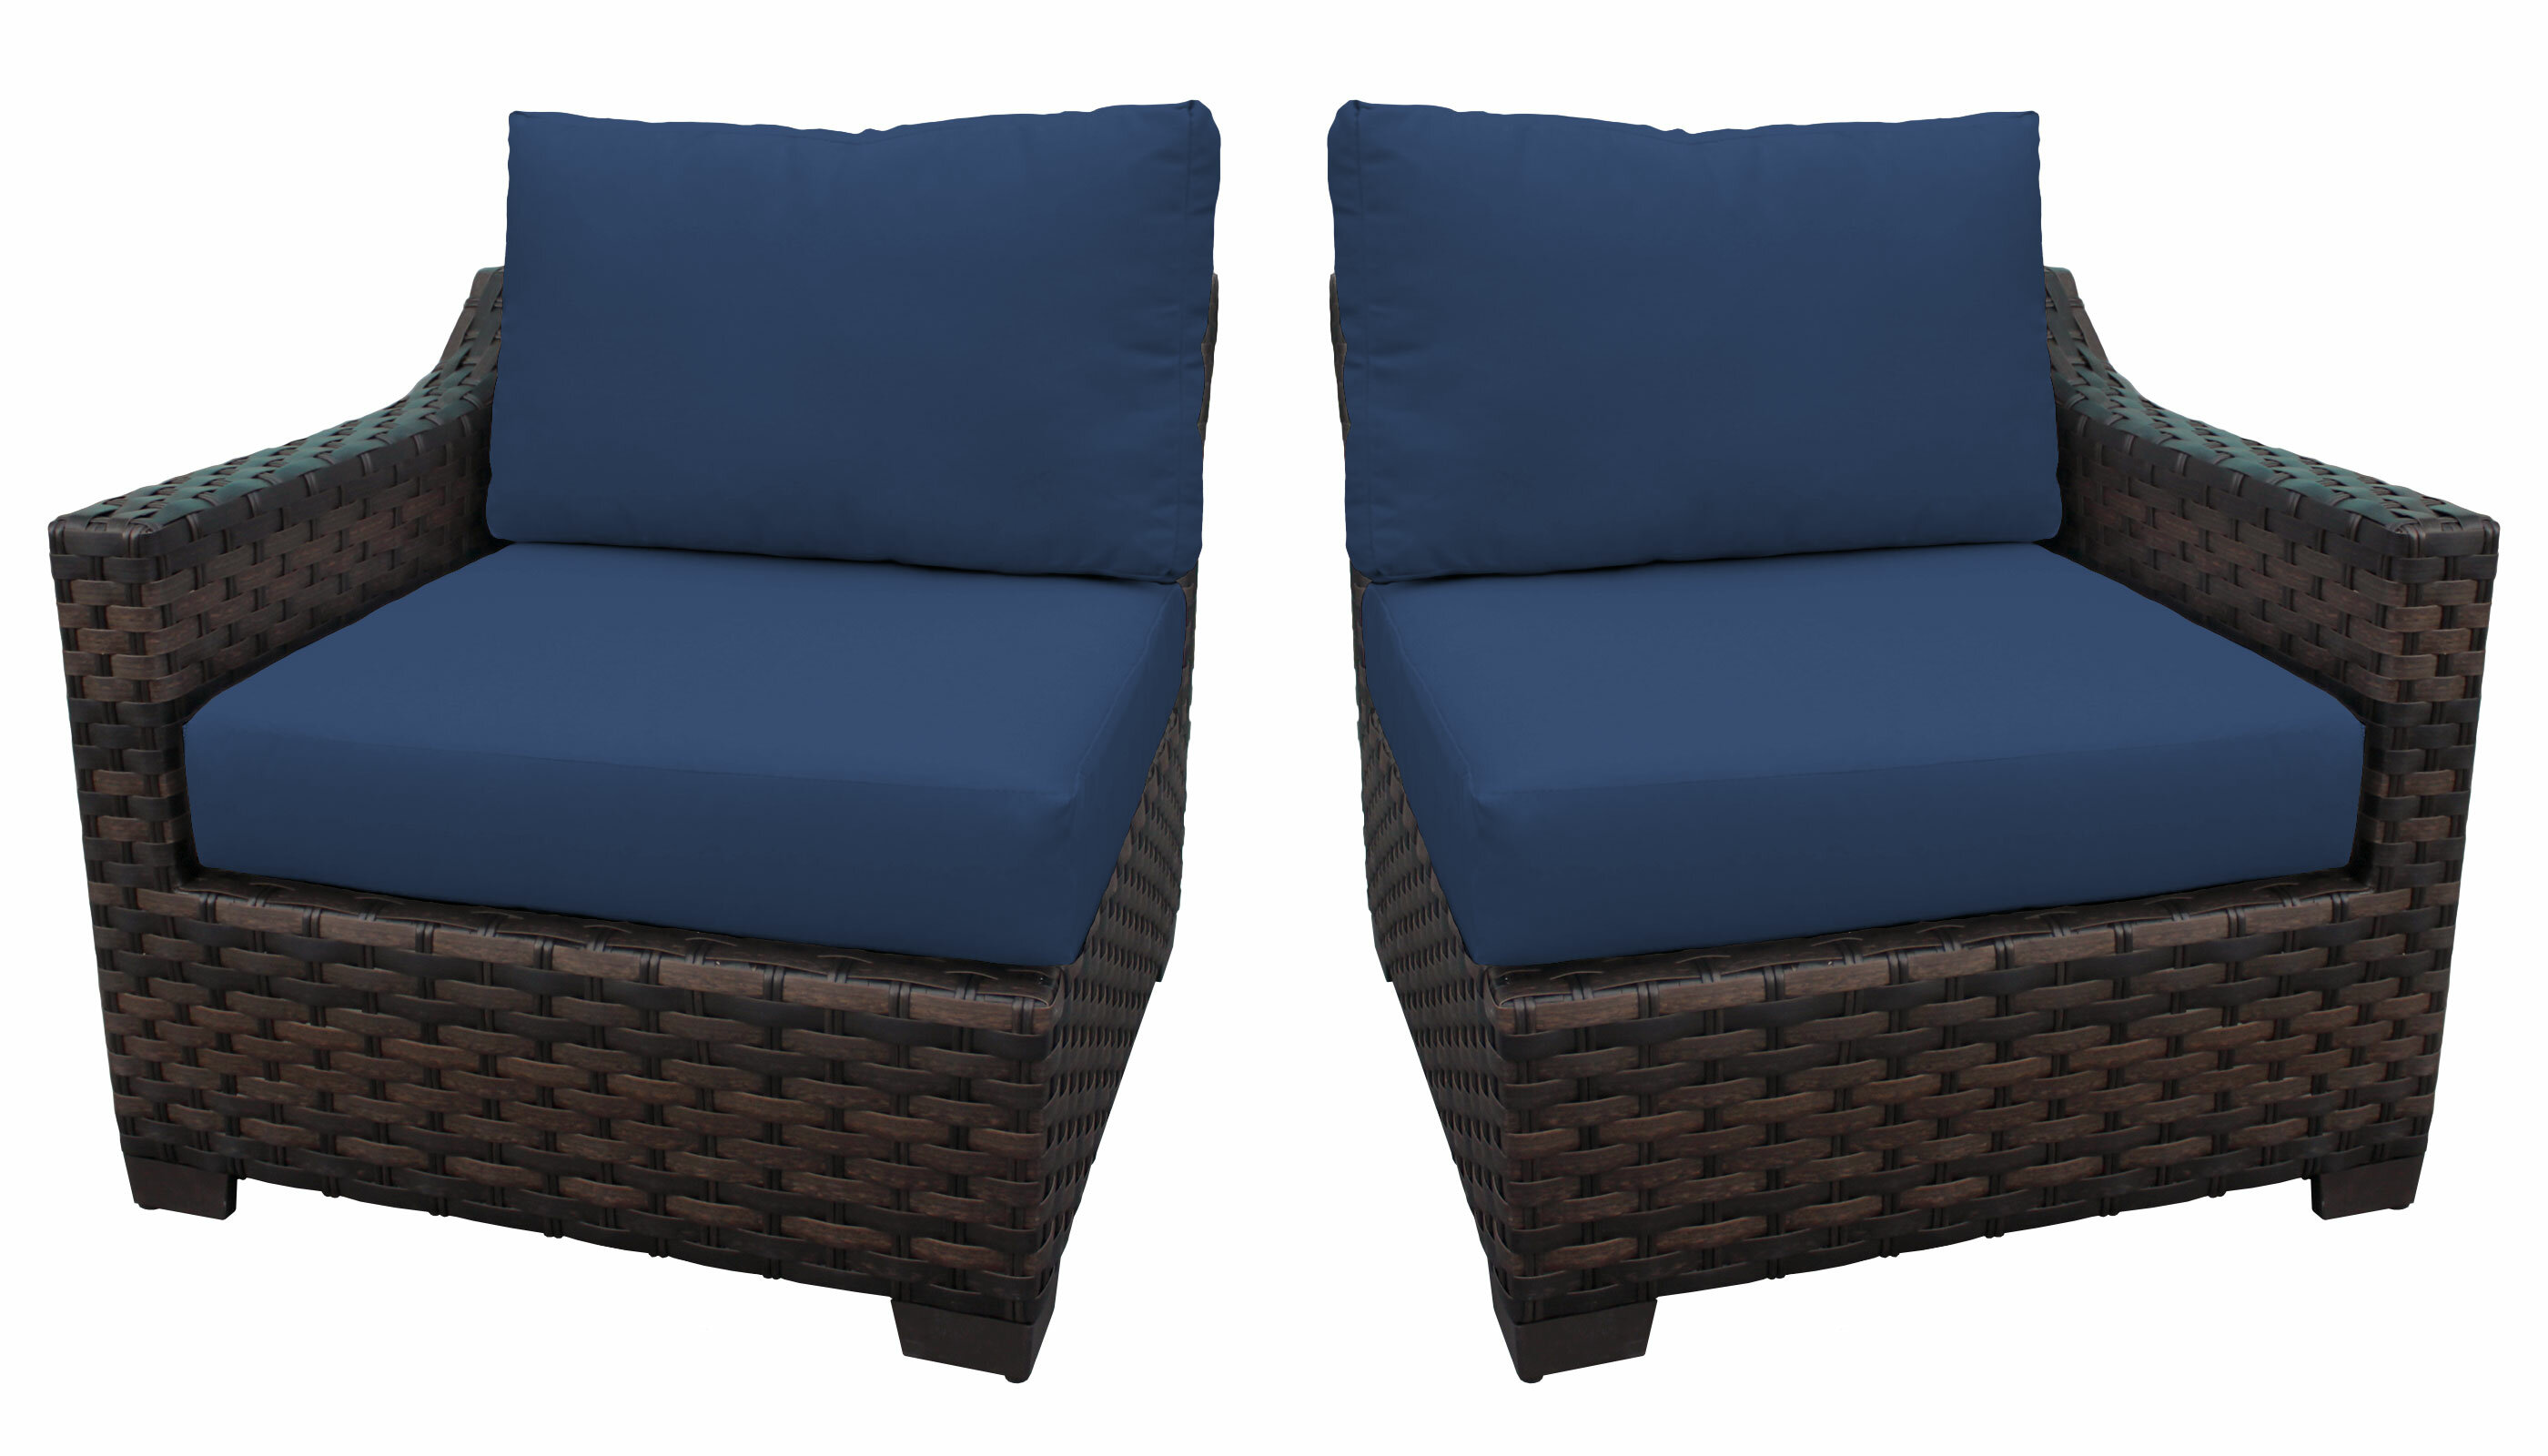 Patio Furniture At Cvs Retail 109 97 Clearance Price 27 49 Clearance Patio Furniture Clearance Outdoor Furniture Wooden Patio Chairs